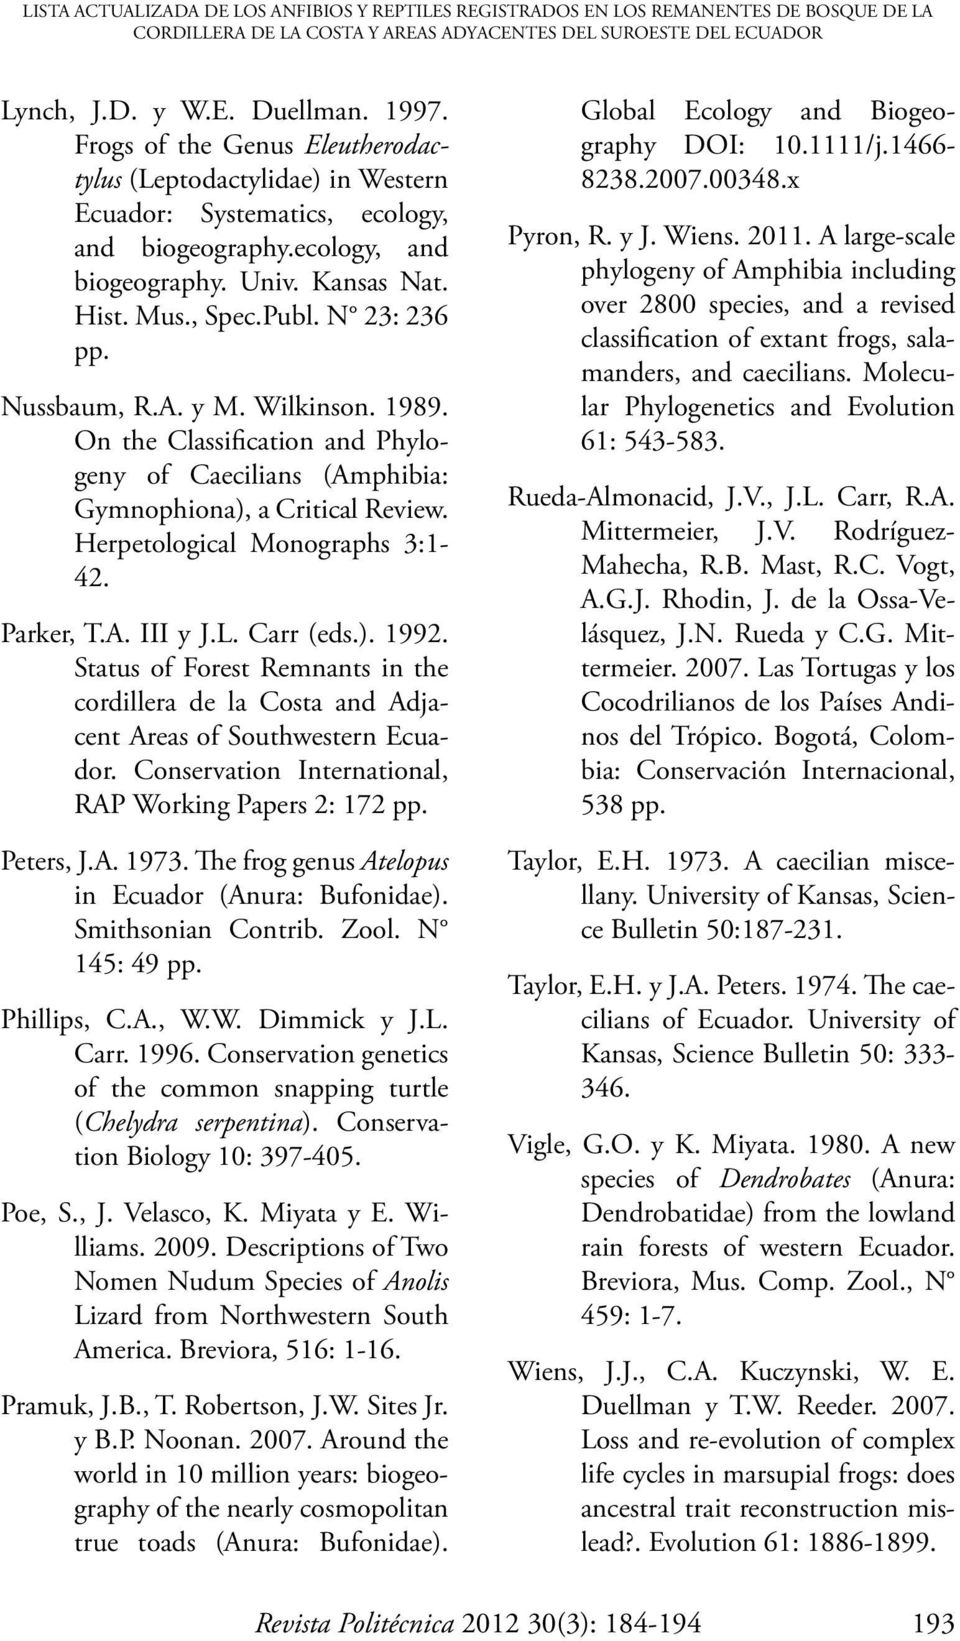 Nussbaum, R.A. y M. Wilkinson. 1989. On the lassification and Phylogeny of aecilians (Amphibia: Gymnophiona), a ritical Review. Herpetological Monographs 3:1-42. Parker, T.A. III y J.L. arr (eds.). 1992.